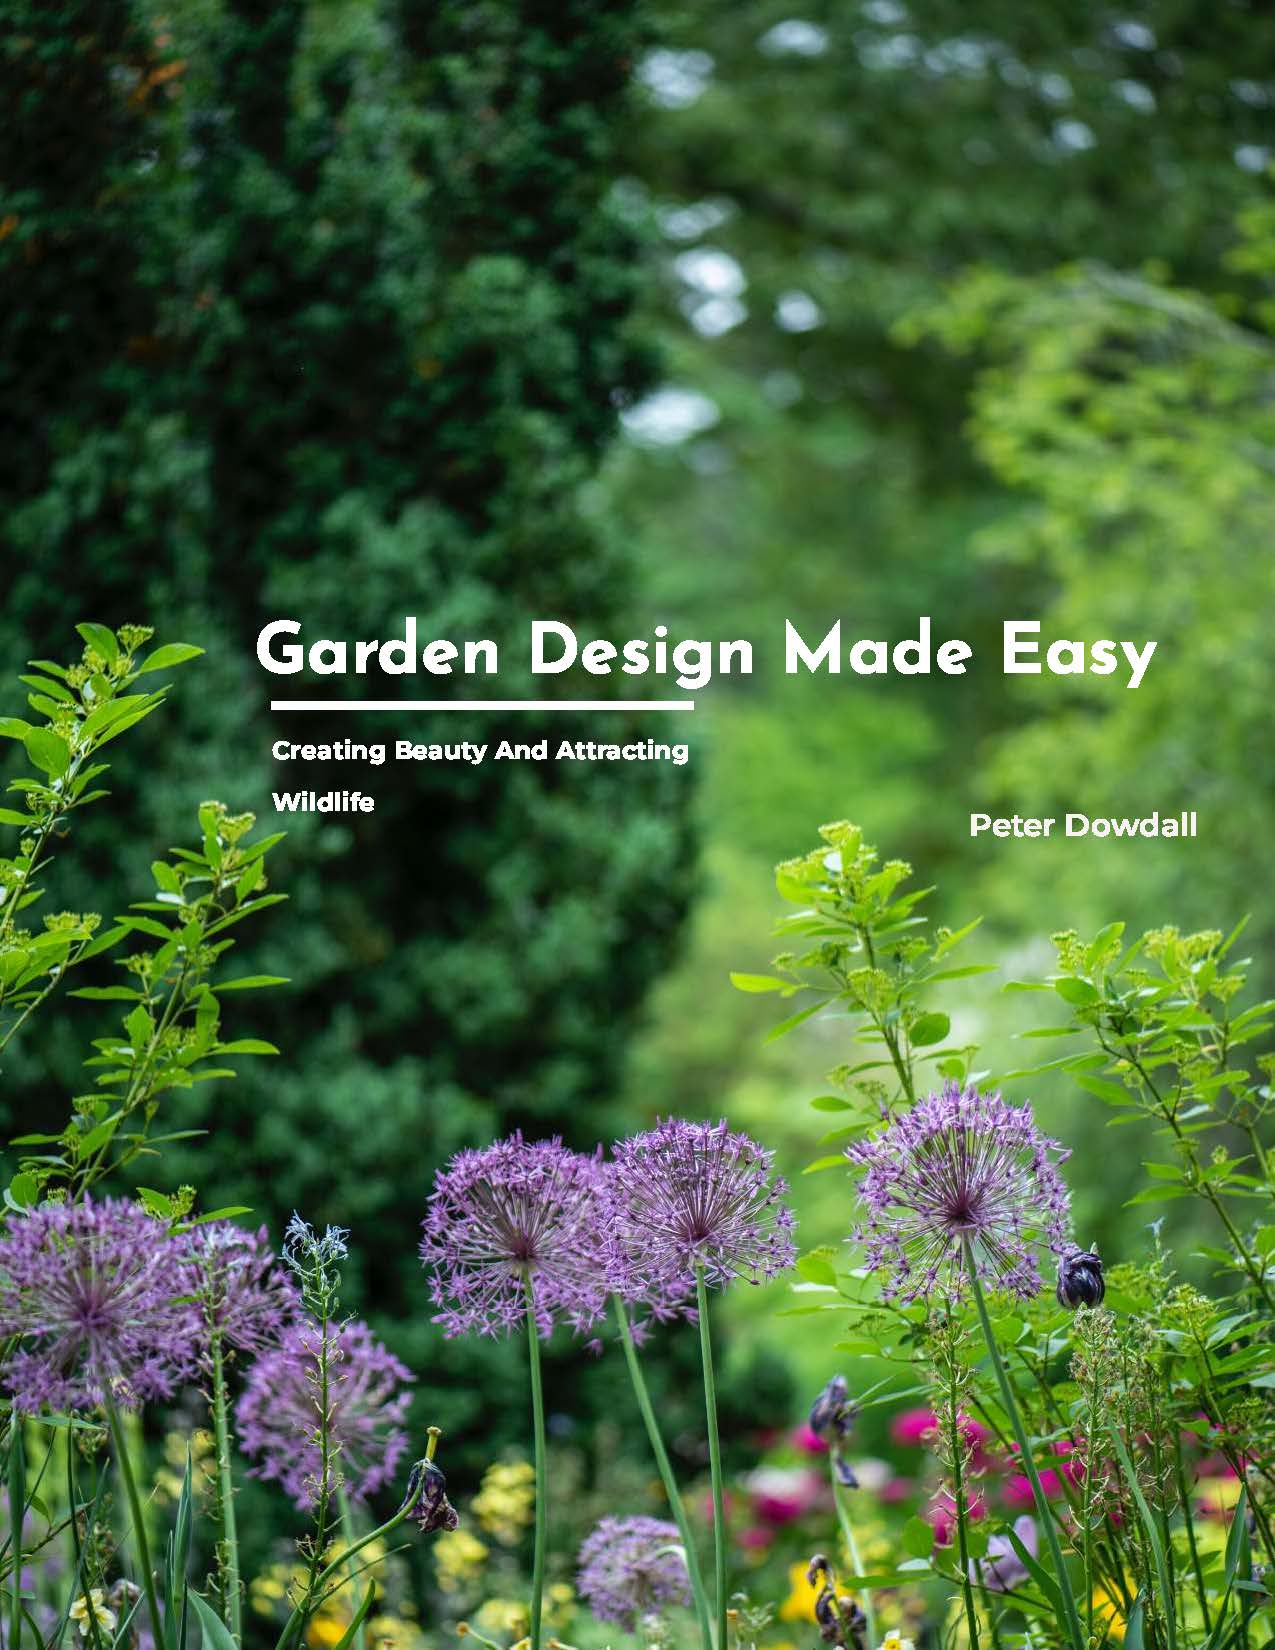 Garden Design Made Easy - Creating Beauty And Attracting Wildlife